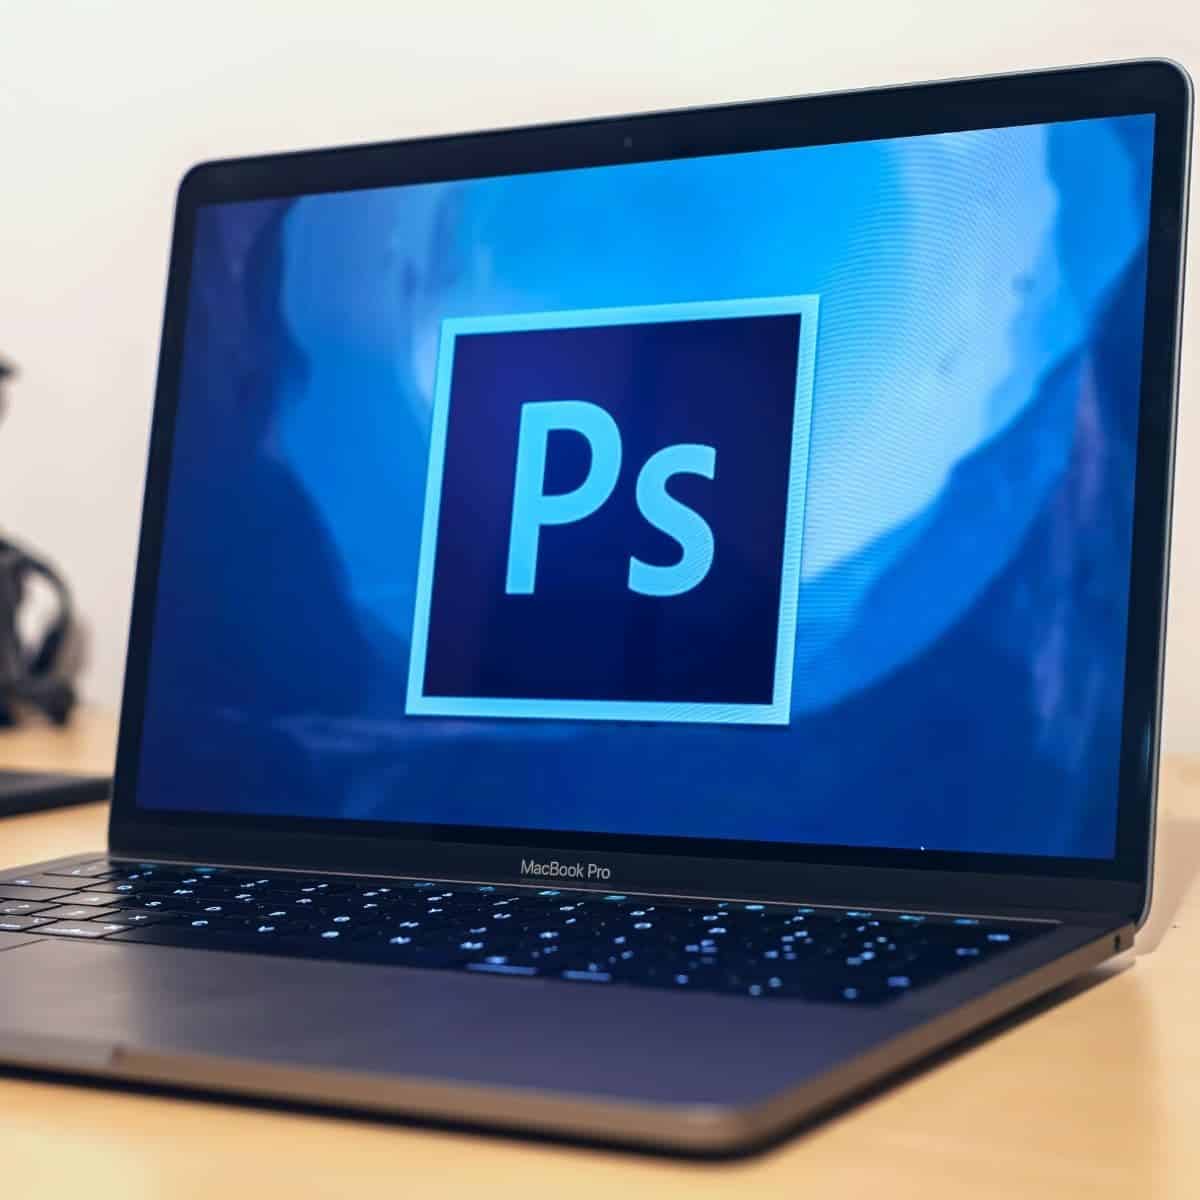 Laptop on a table displaying the Photoshop logo.